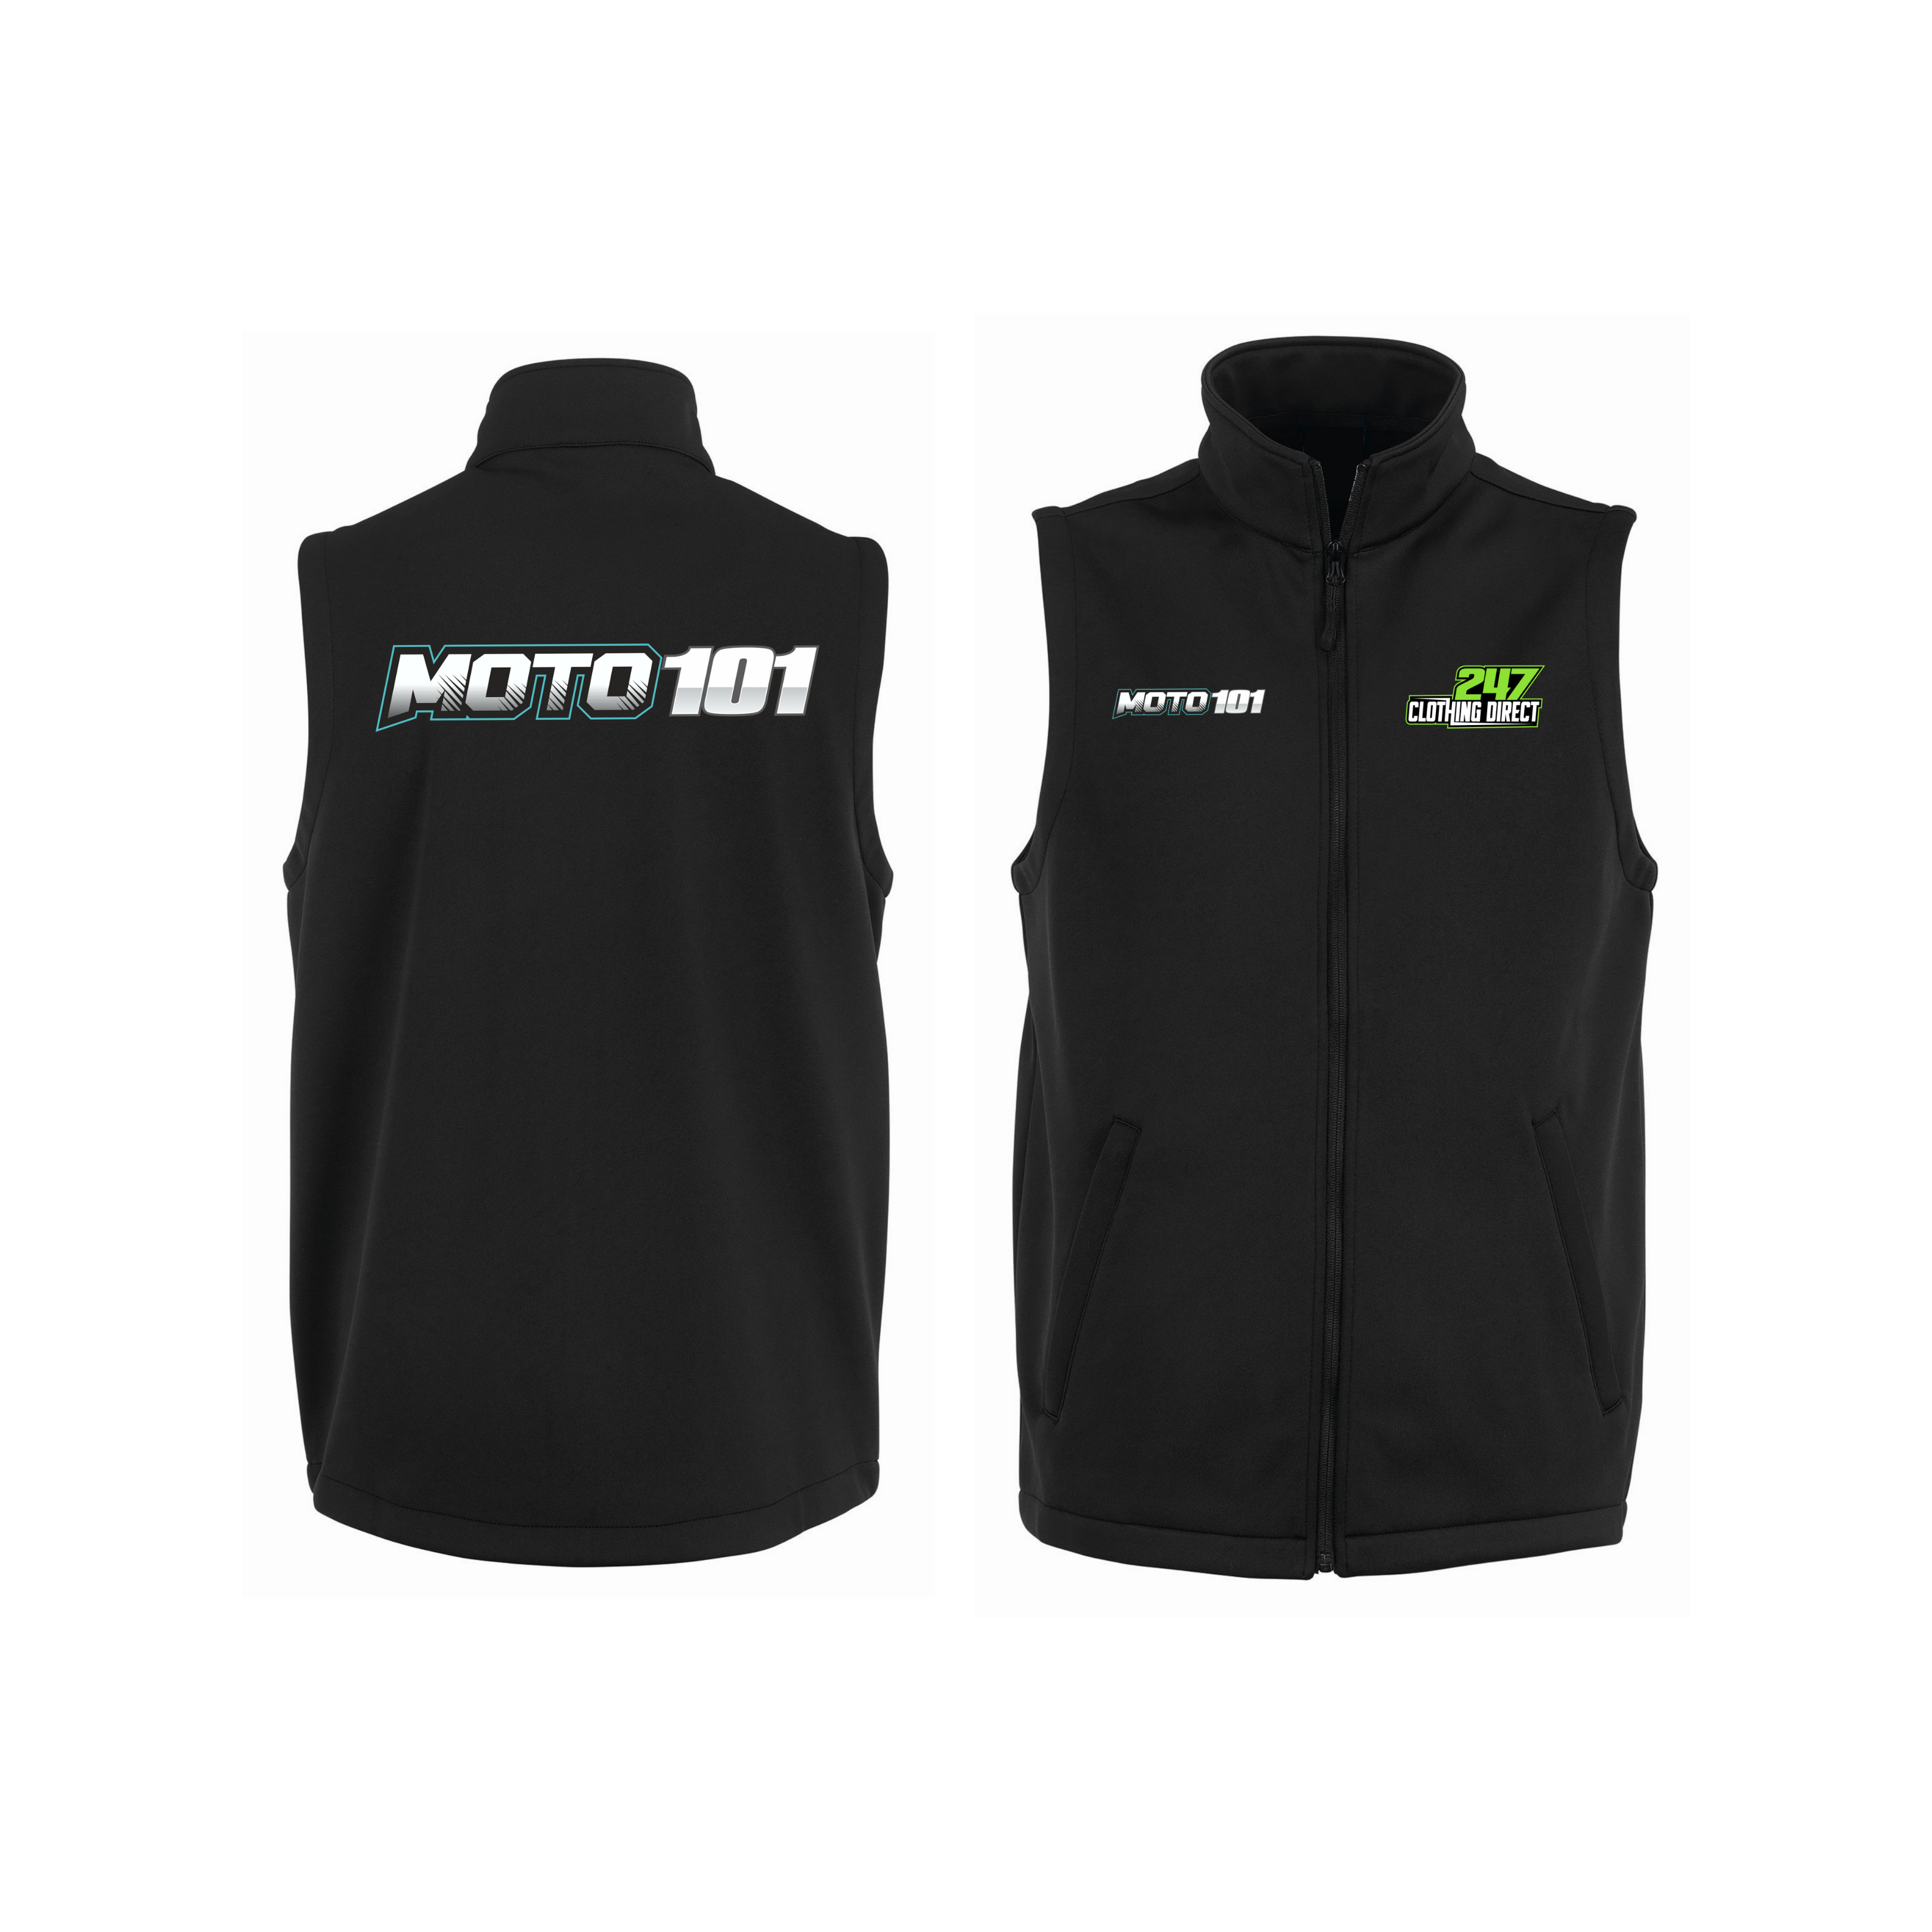 Moto101 Gilet in sleek black with zippered pockets and adjustable waistband on model